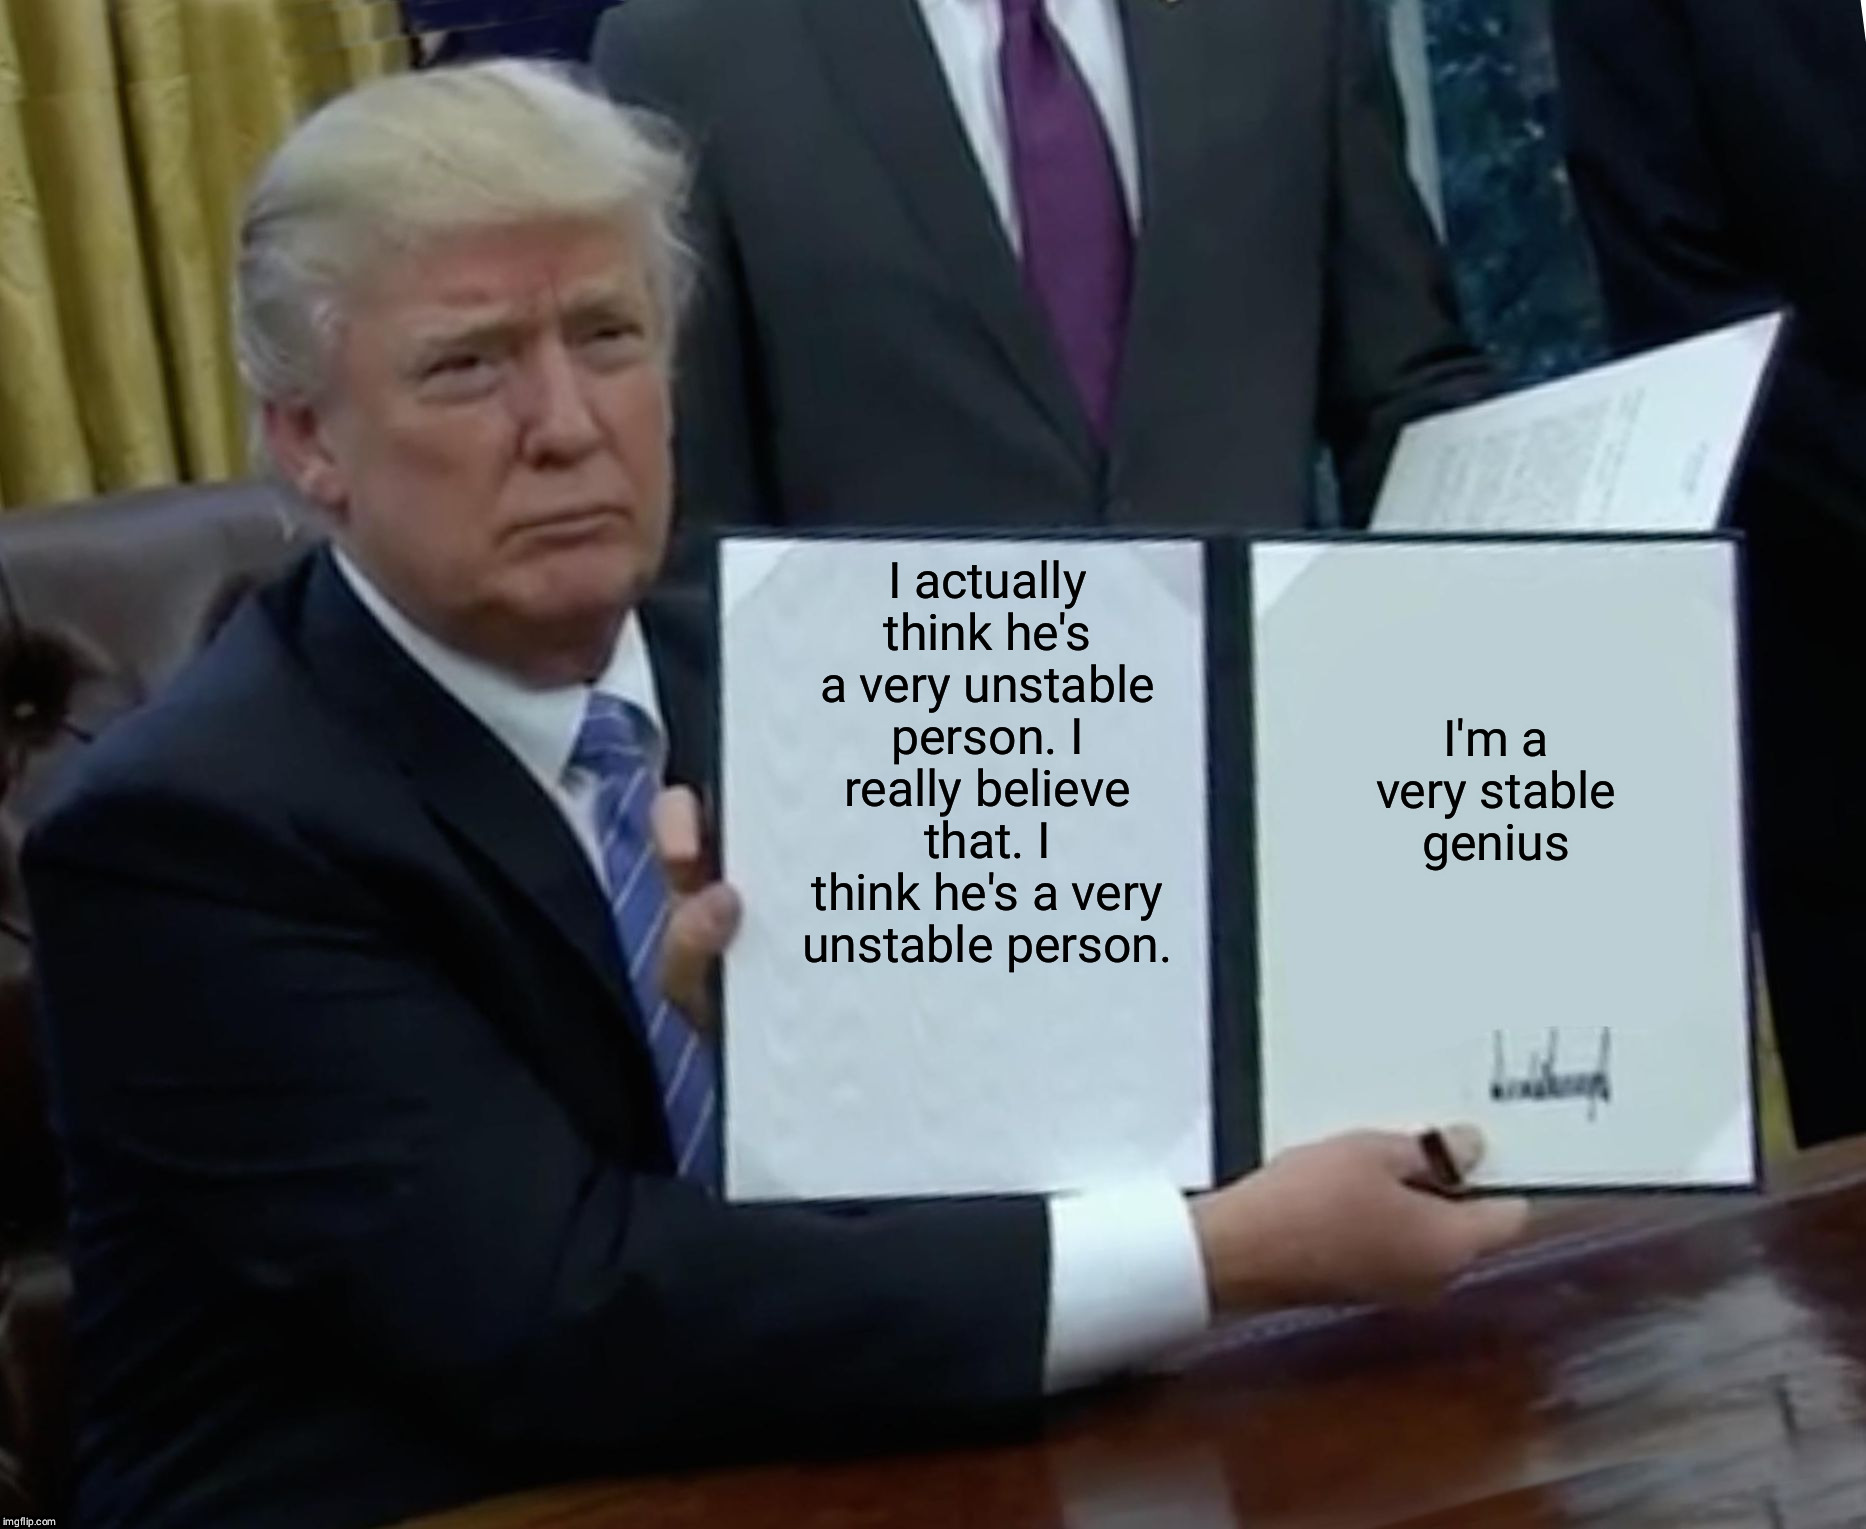 I actually think he's a very unstable person. I really believe that. I think he's a very unstable person. I'm a very stable genius | image tagged in memes,trump bill signing | made w/ Imgflip meme maker